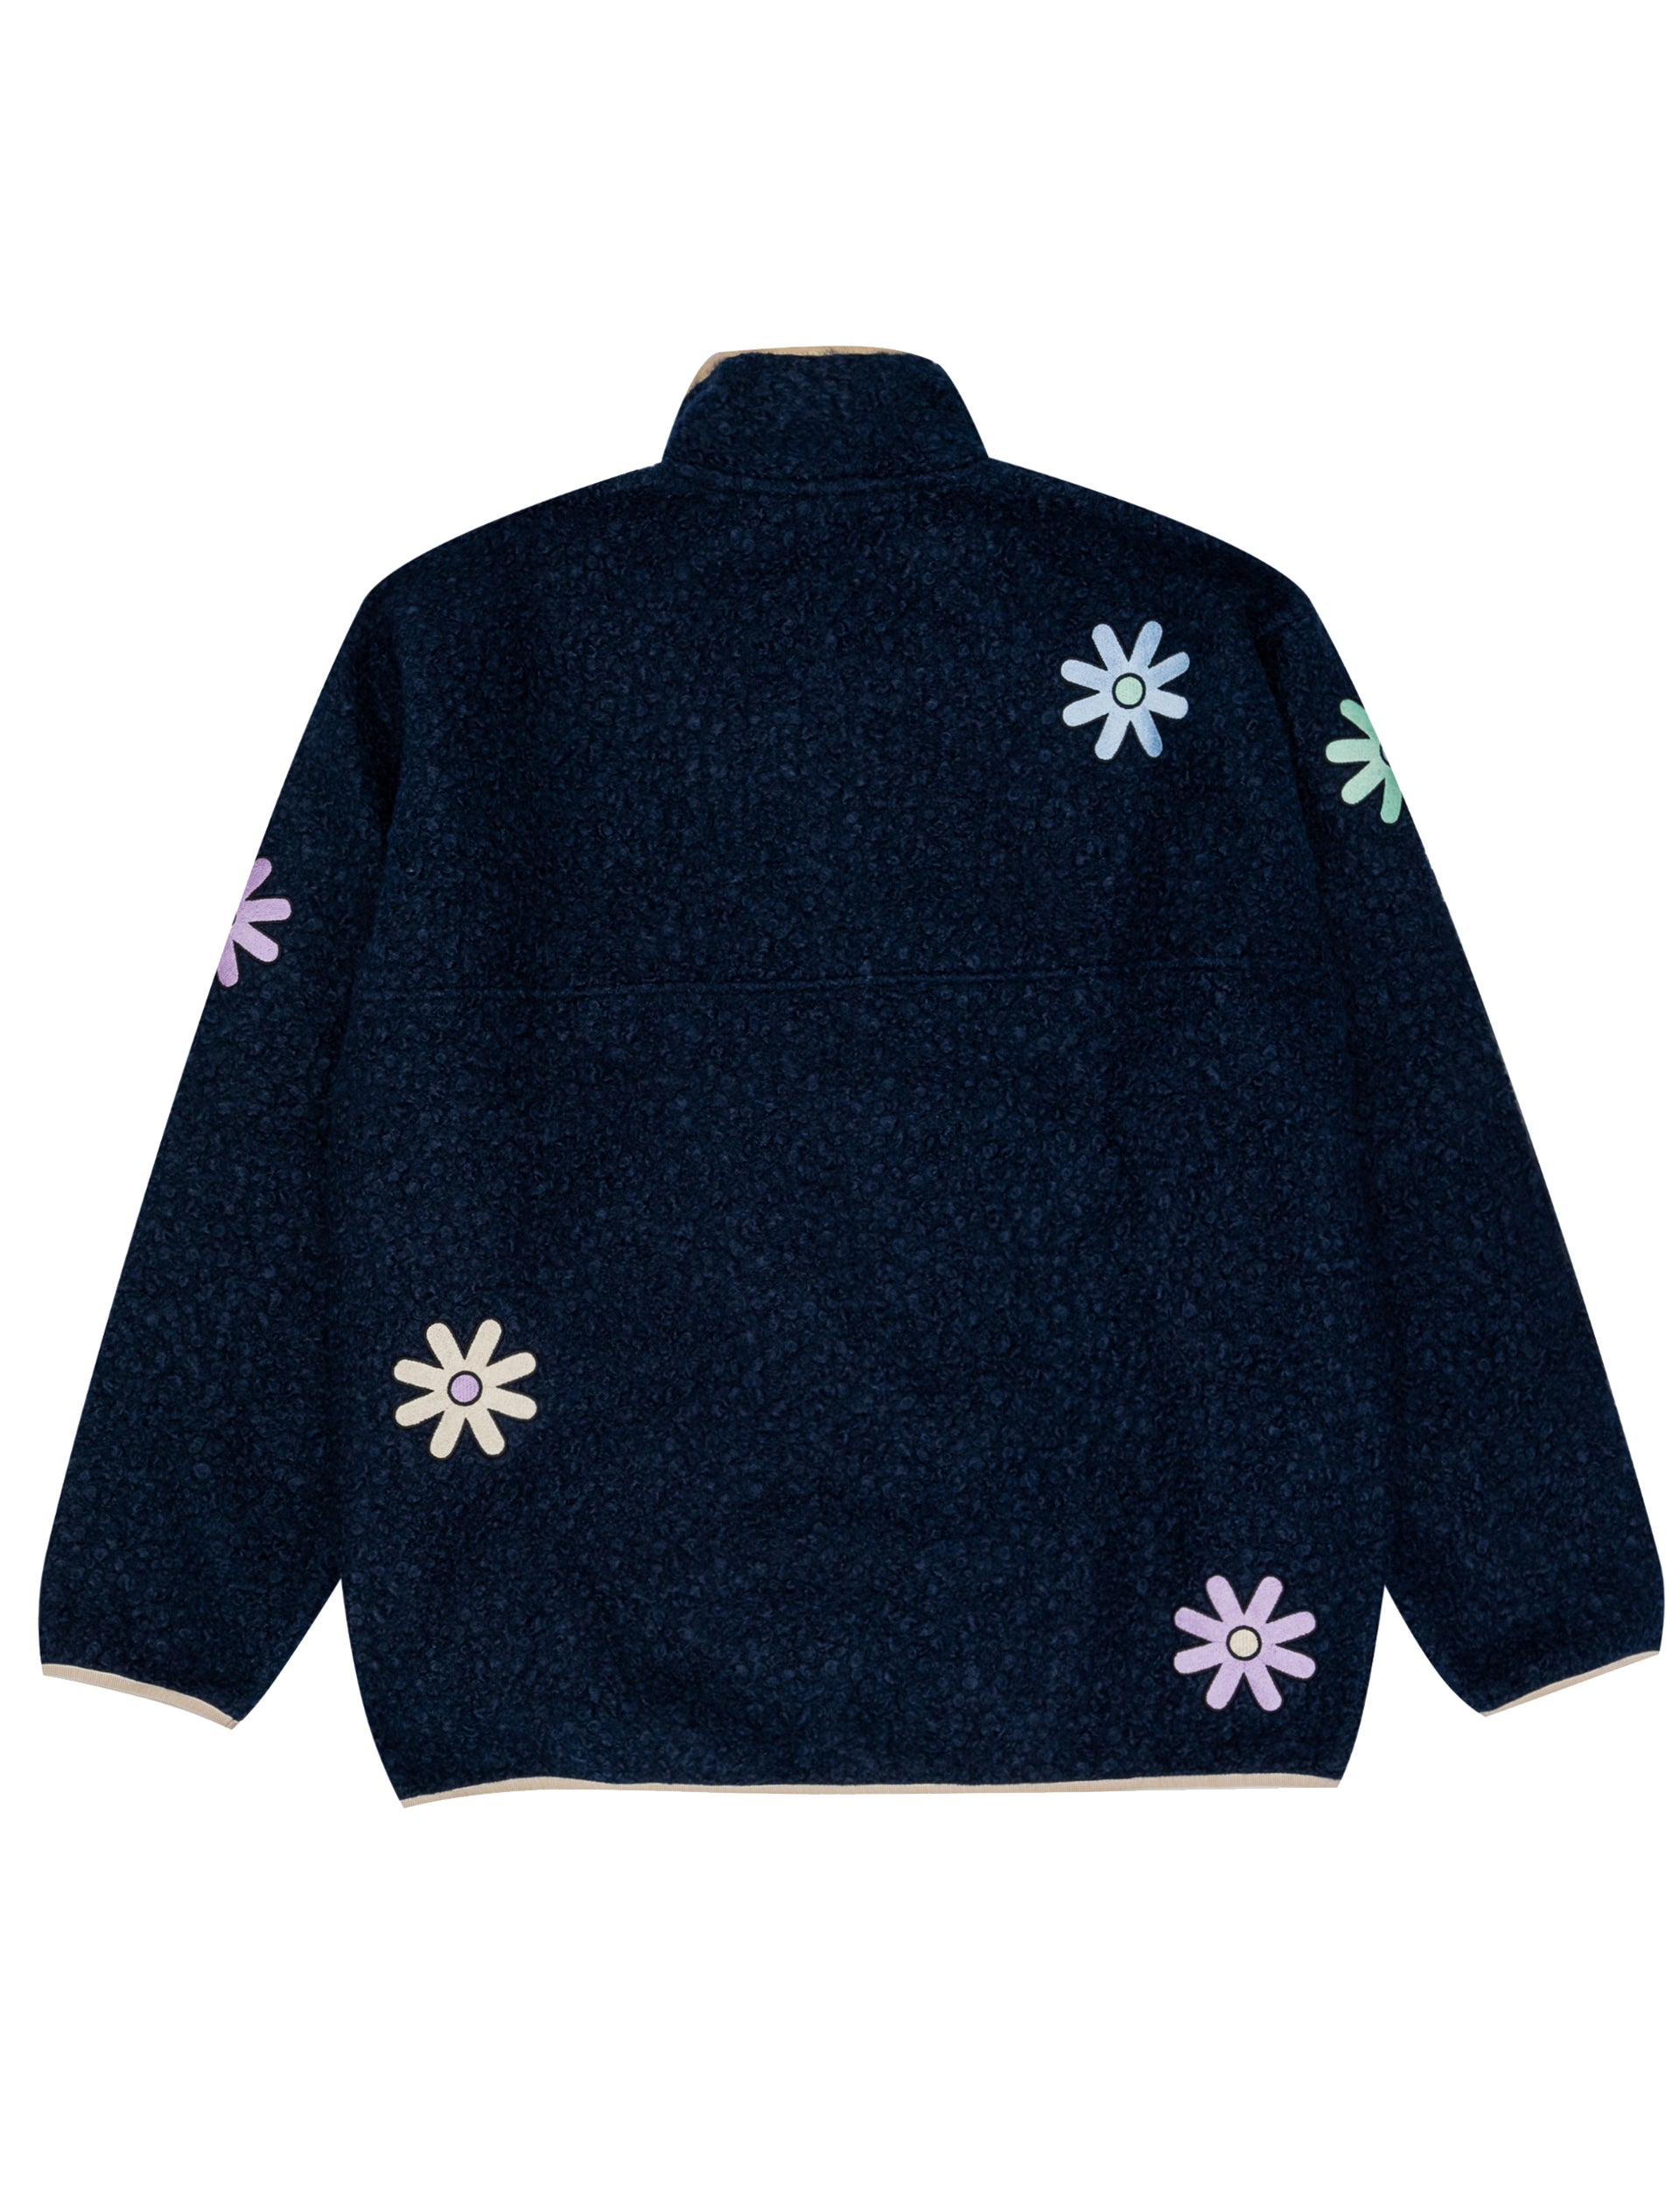 RECEPTION CLOTHING POP OVER FLOWERS PES SHERPA FLEECE NAVY